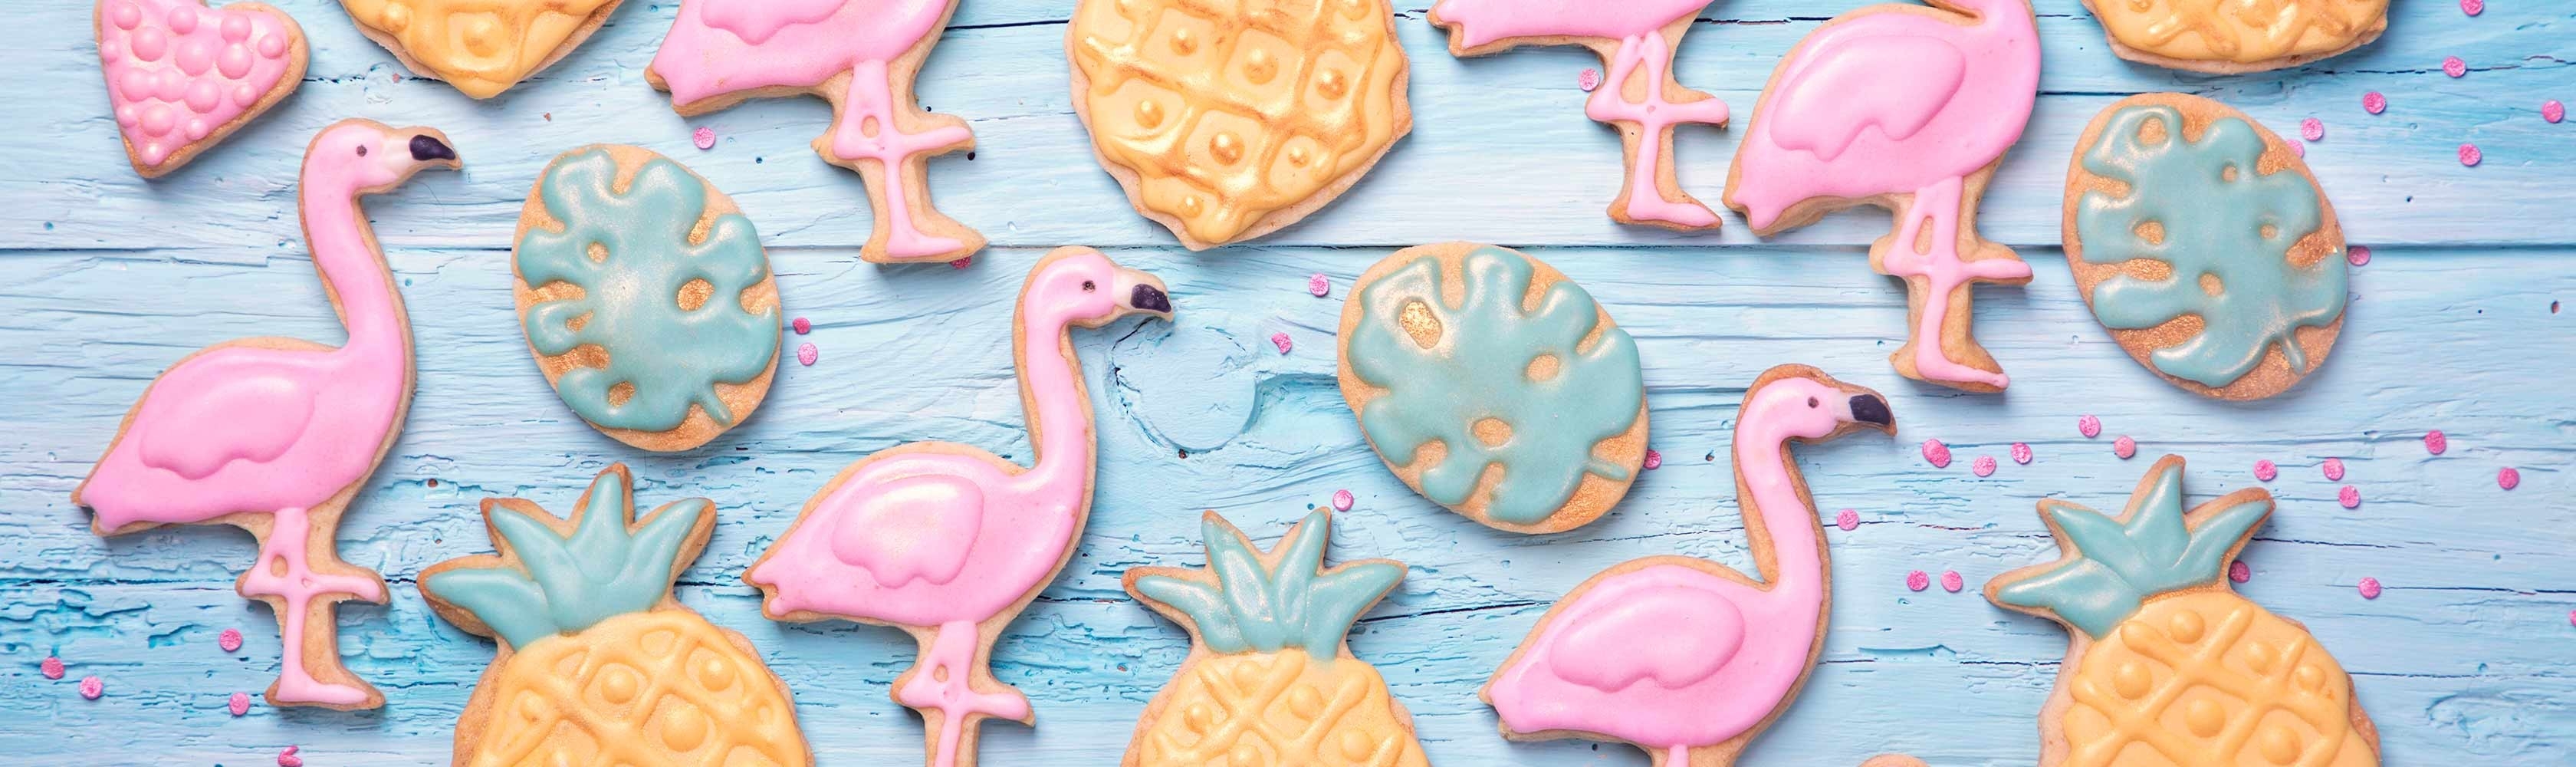 Flamants roses et biscuits ananas